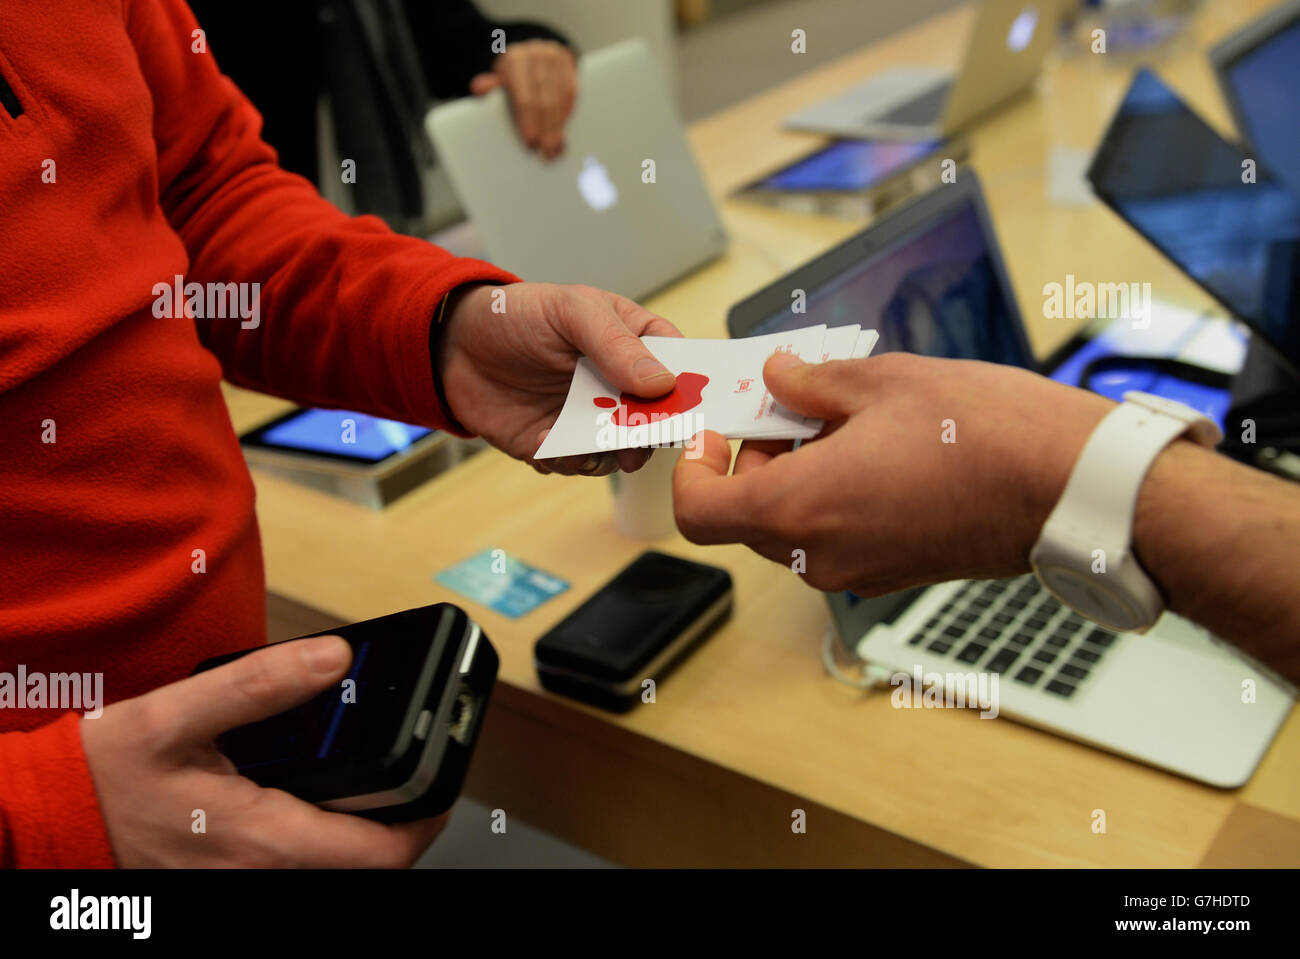 An Apple employee hands-out a red Apple sticker following a purchase as the Apple store on Regent Street, London, displays red logos in recognition of World AIDS Day as Apple stores across the globe go red, with a red logo and other red elements in store. Stock Photo